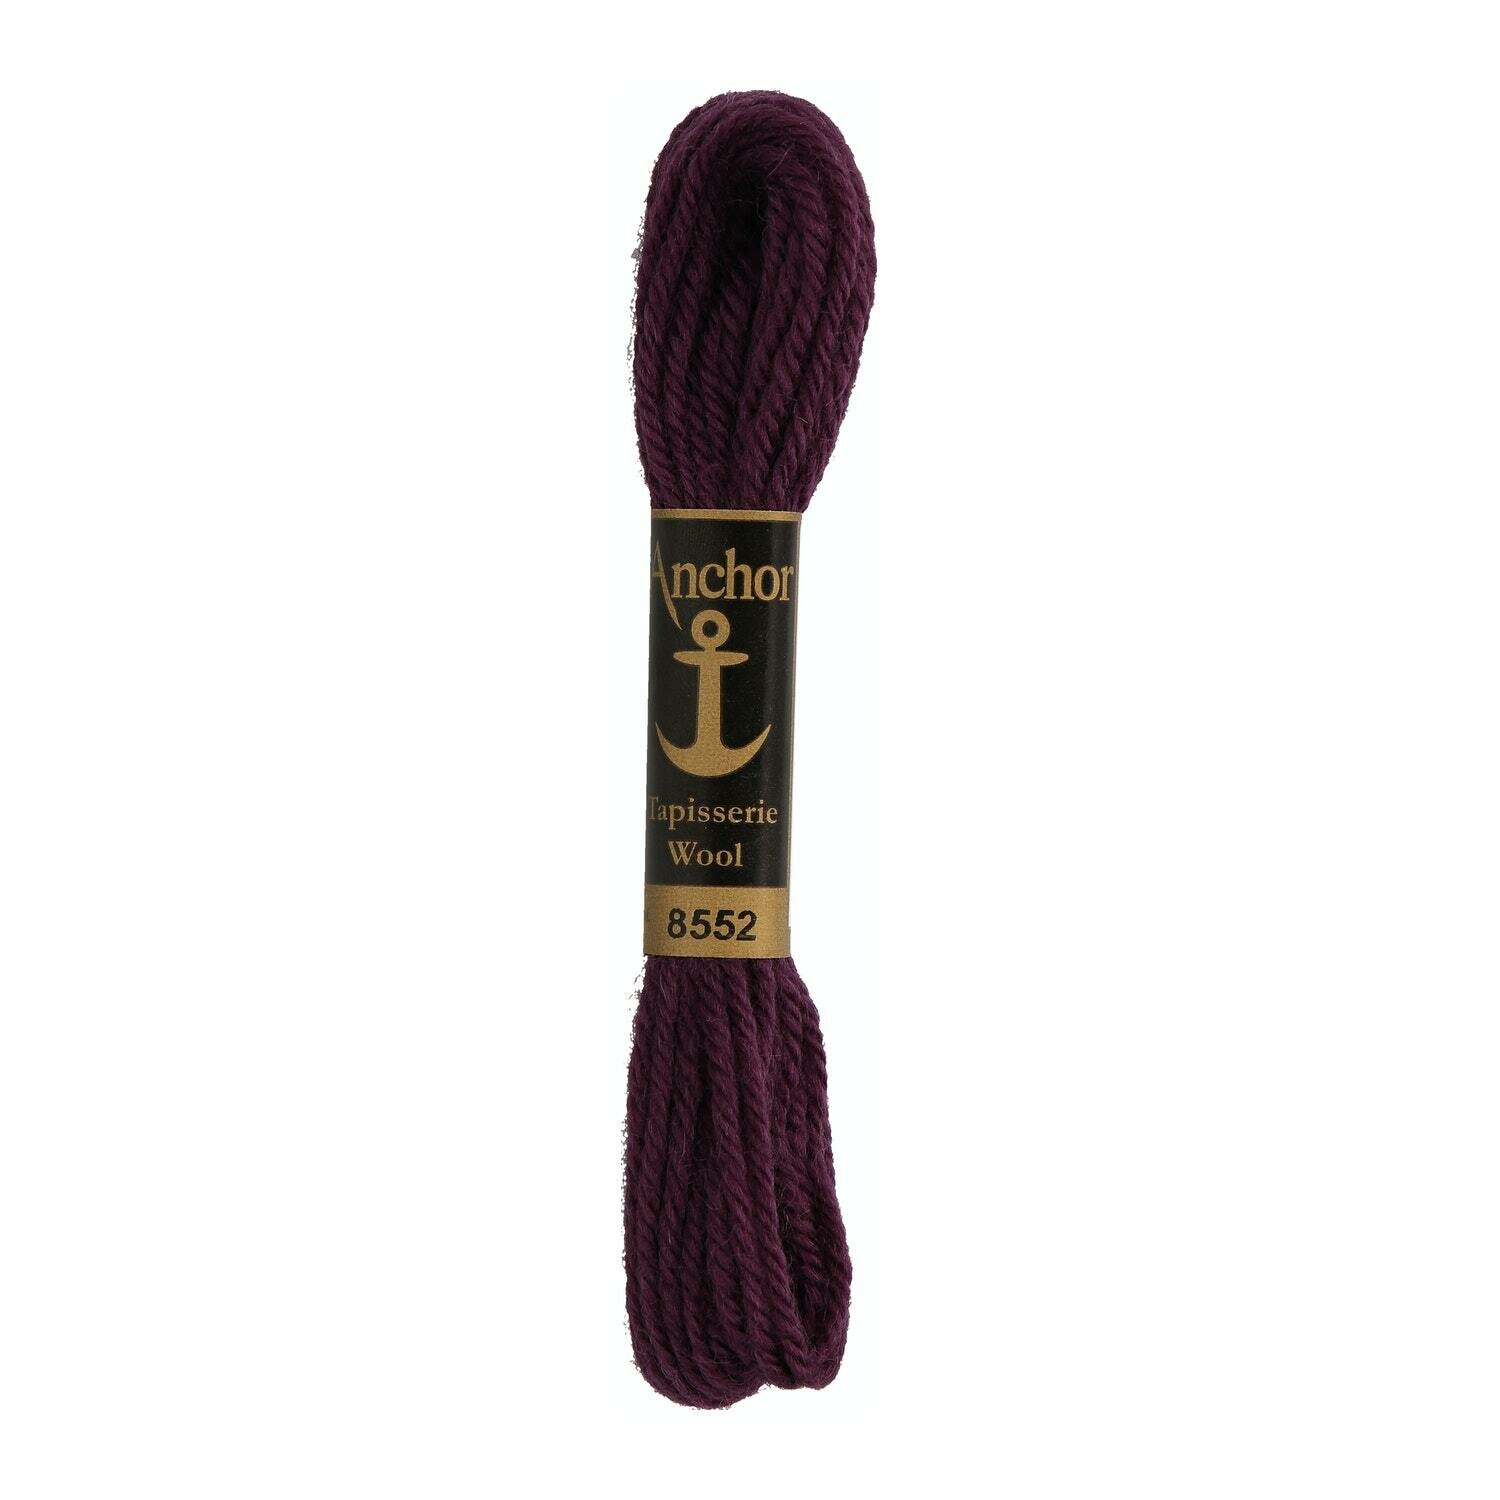 Anchor Tapisserie Wool # 08552